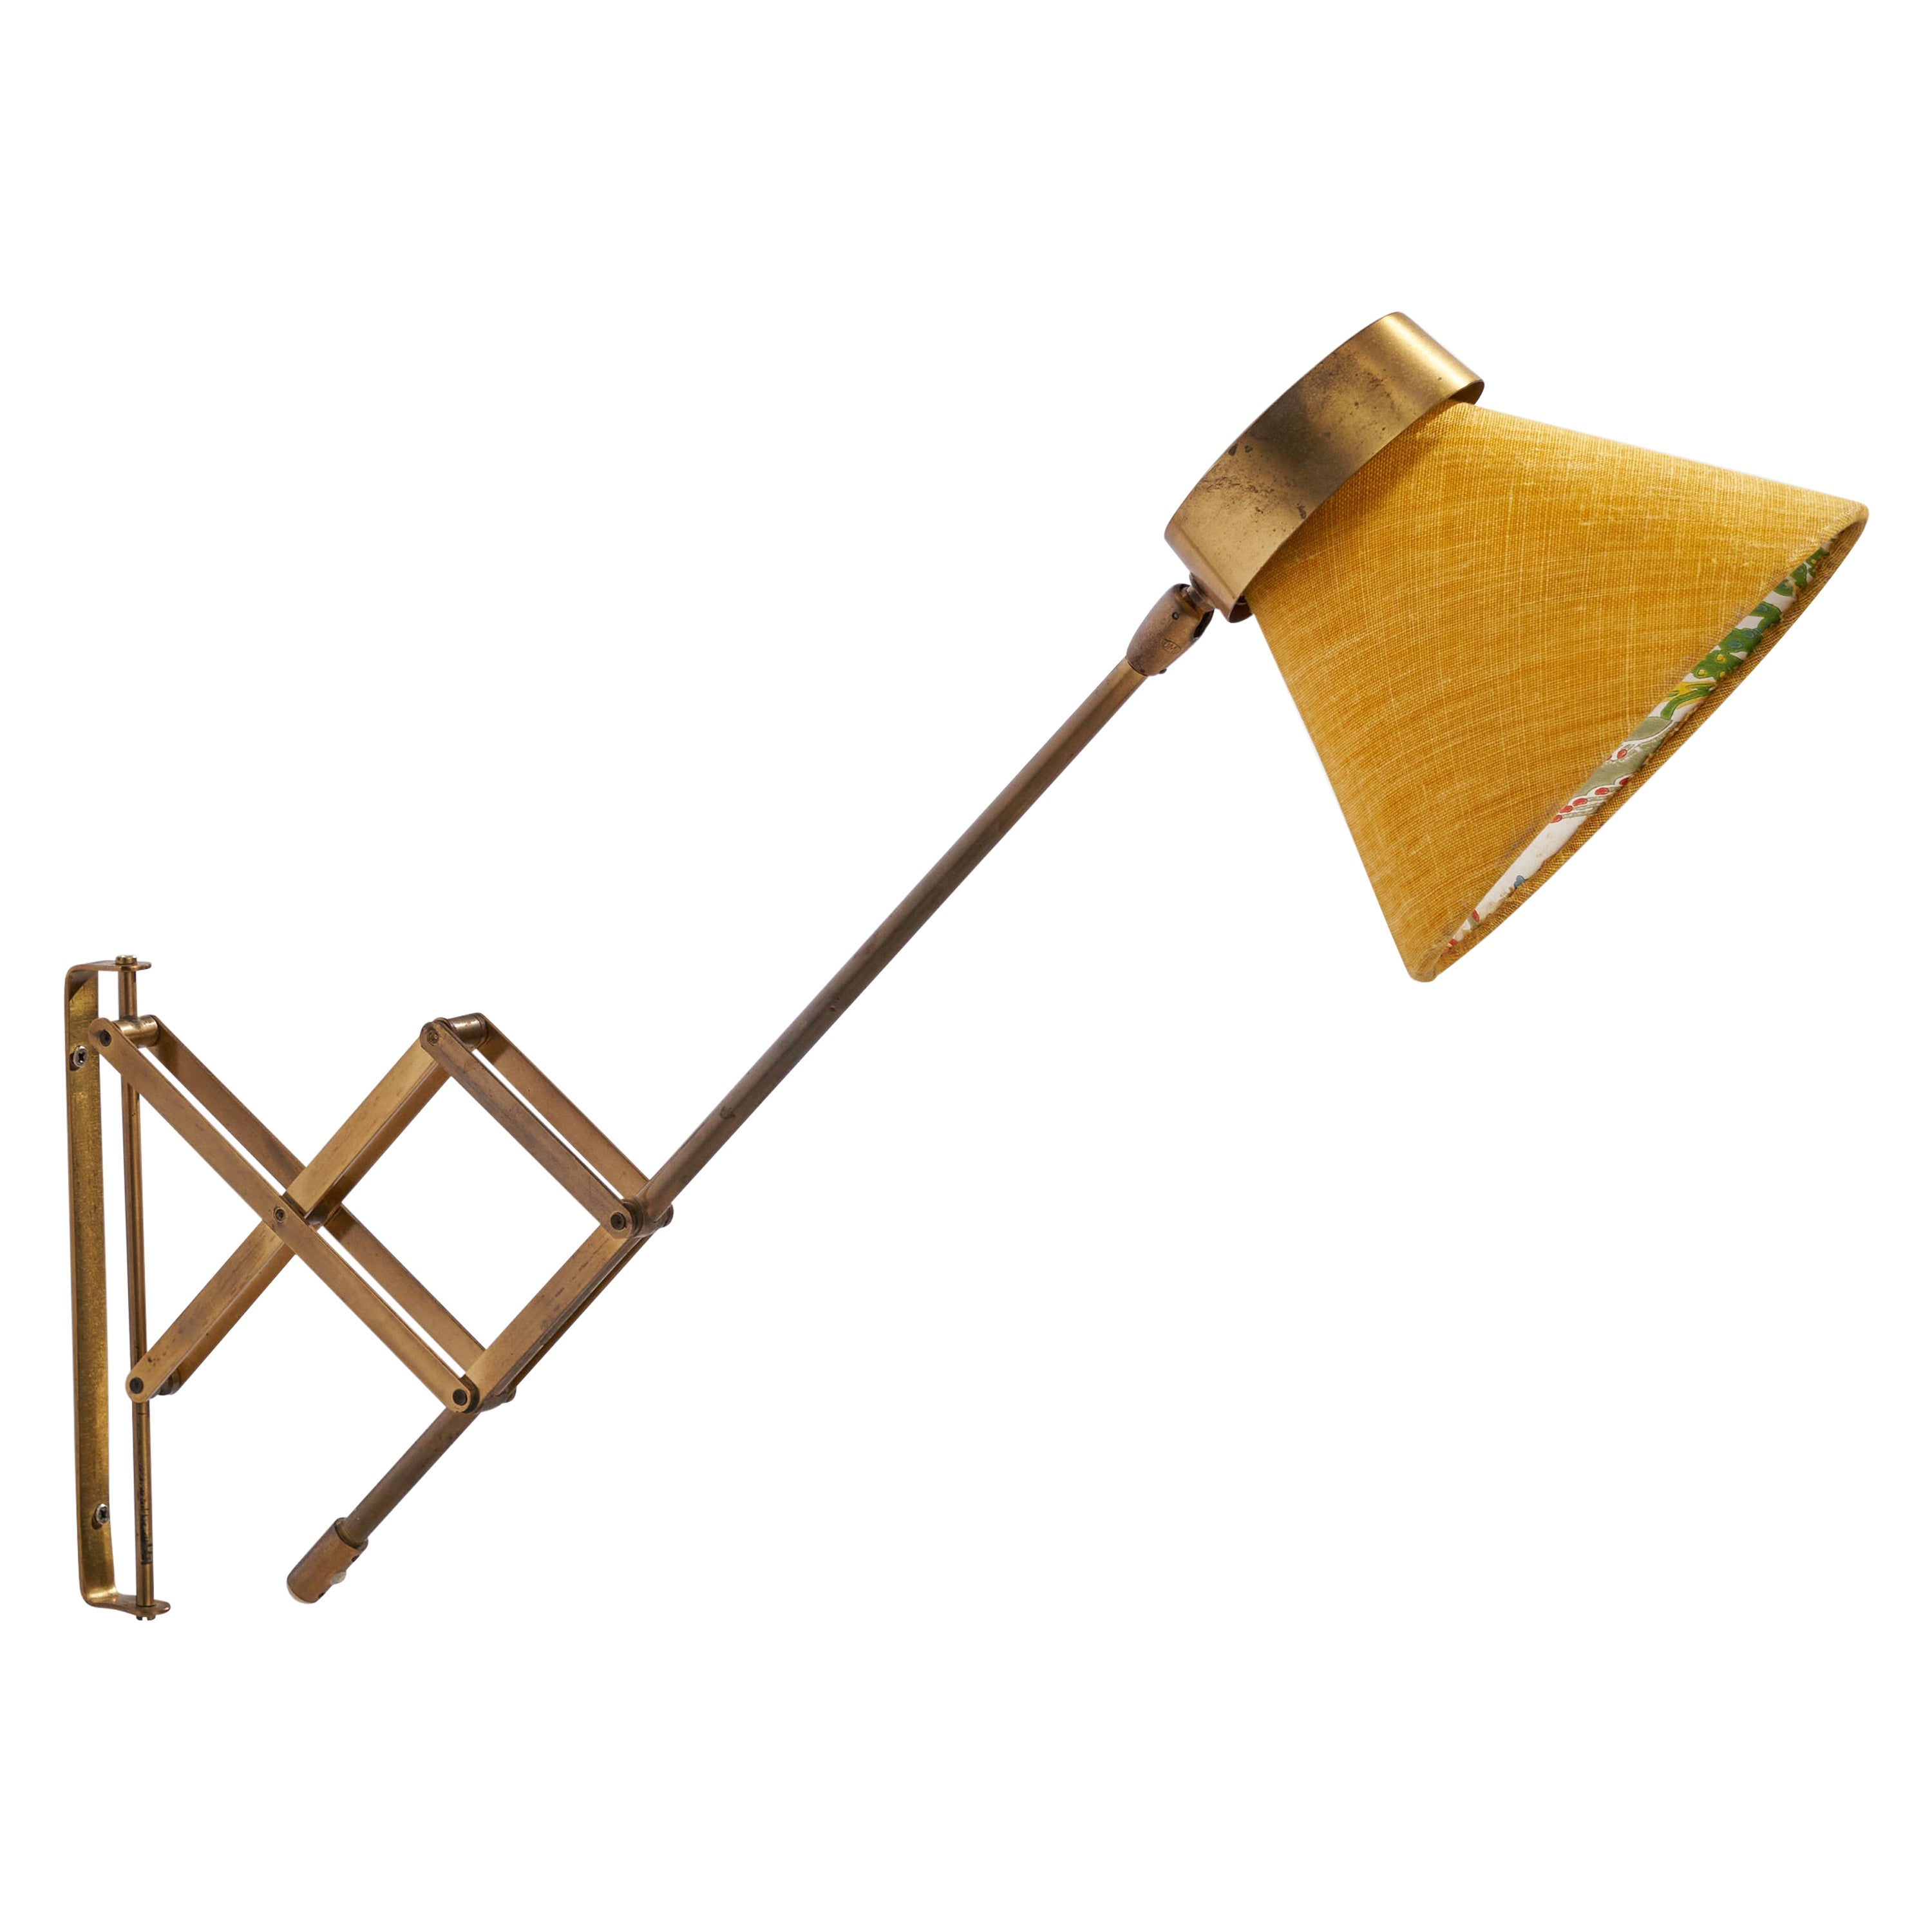 T.H. Valentiner, Wall Light, Brass, Fabric, Denmark, 1950s For Sale